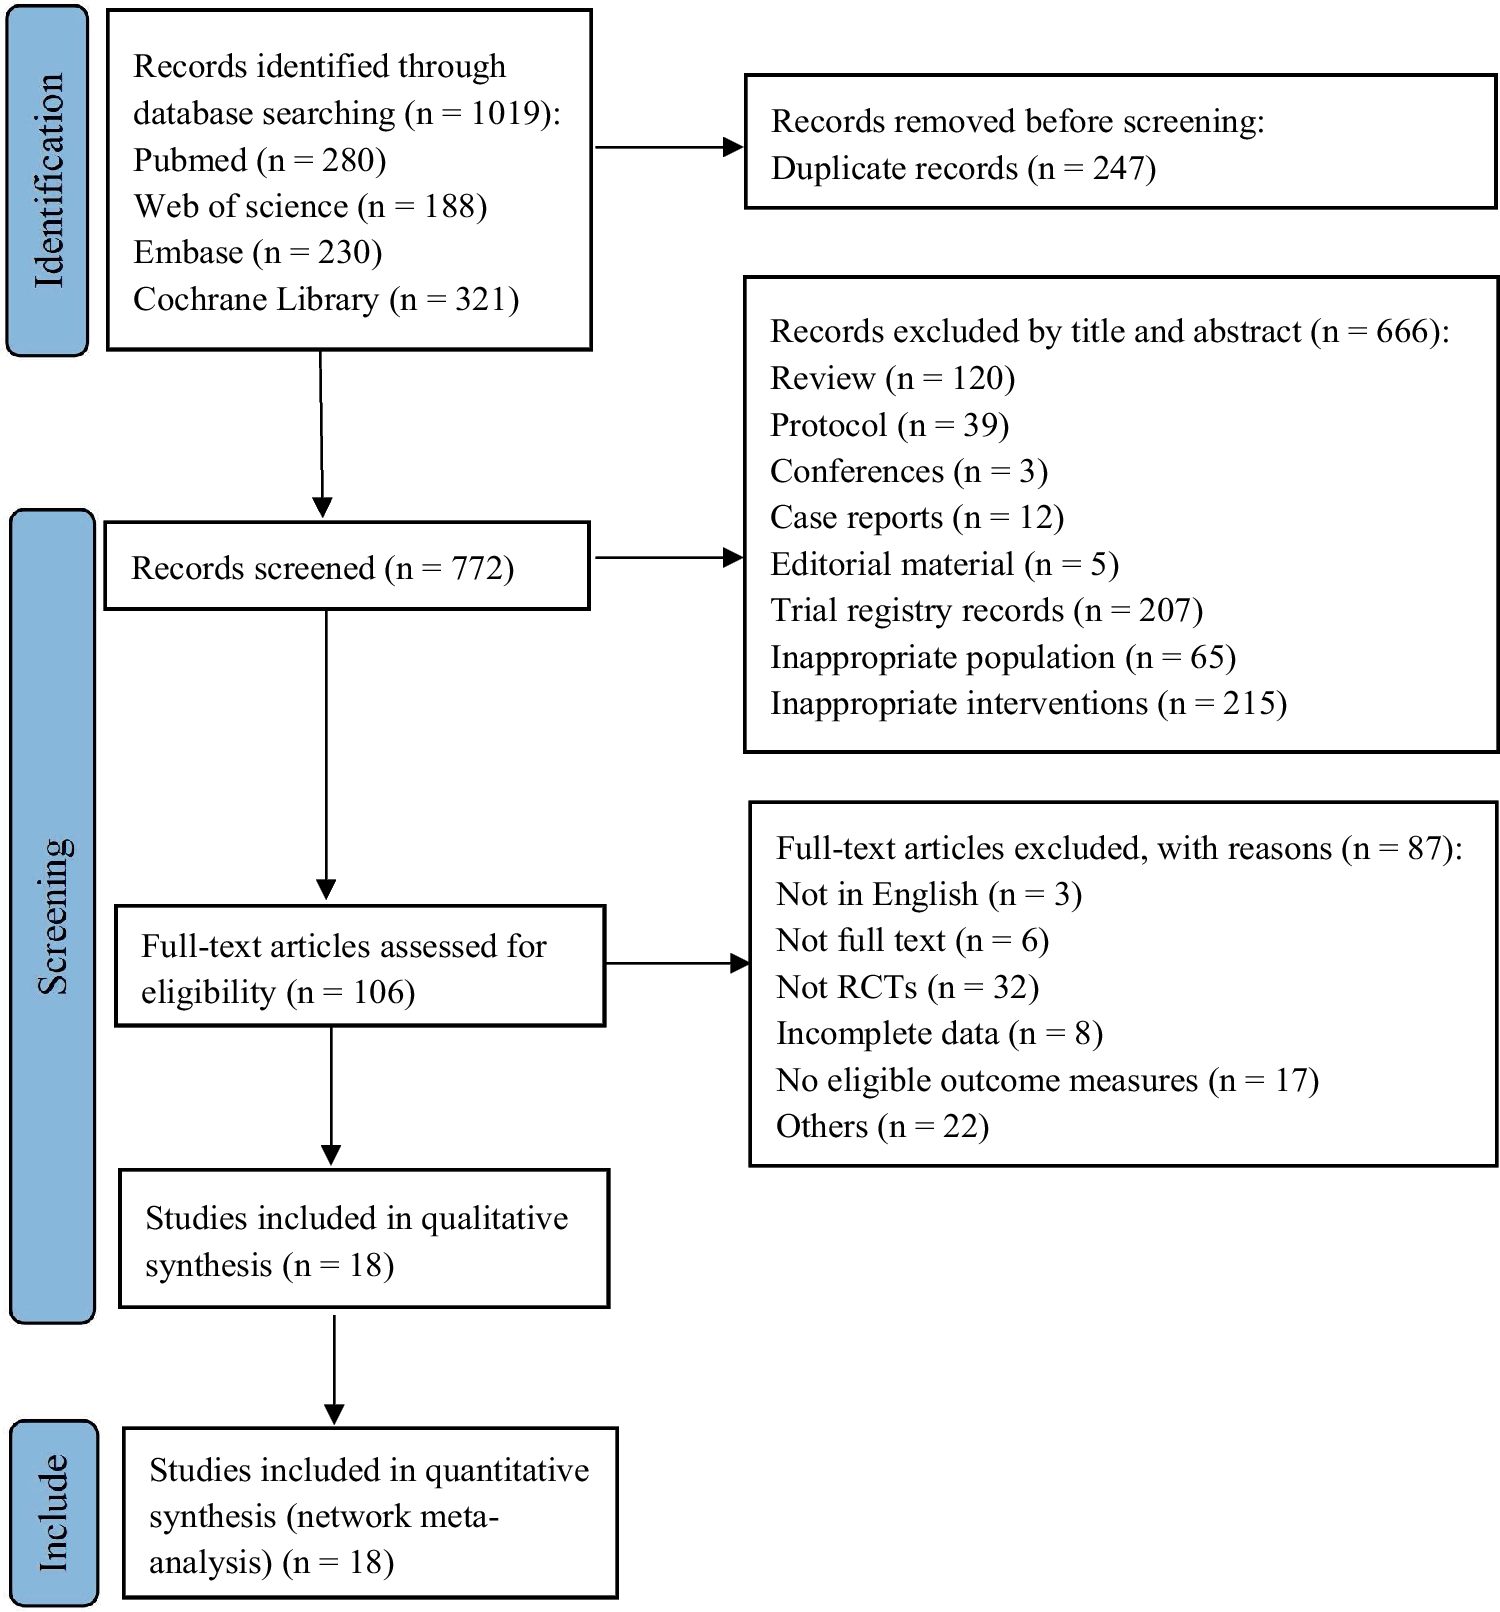 Comparative Efficacy of Mind–Body Exercise for Treating Chronic Non-Specific Neck Pain: A Systematic Review and Network Meta-Analysis